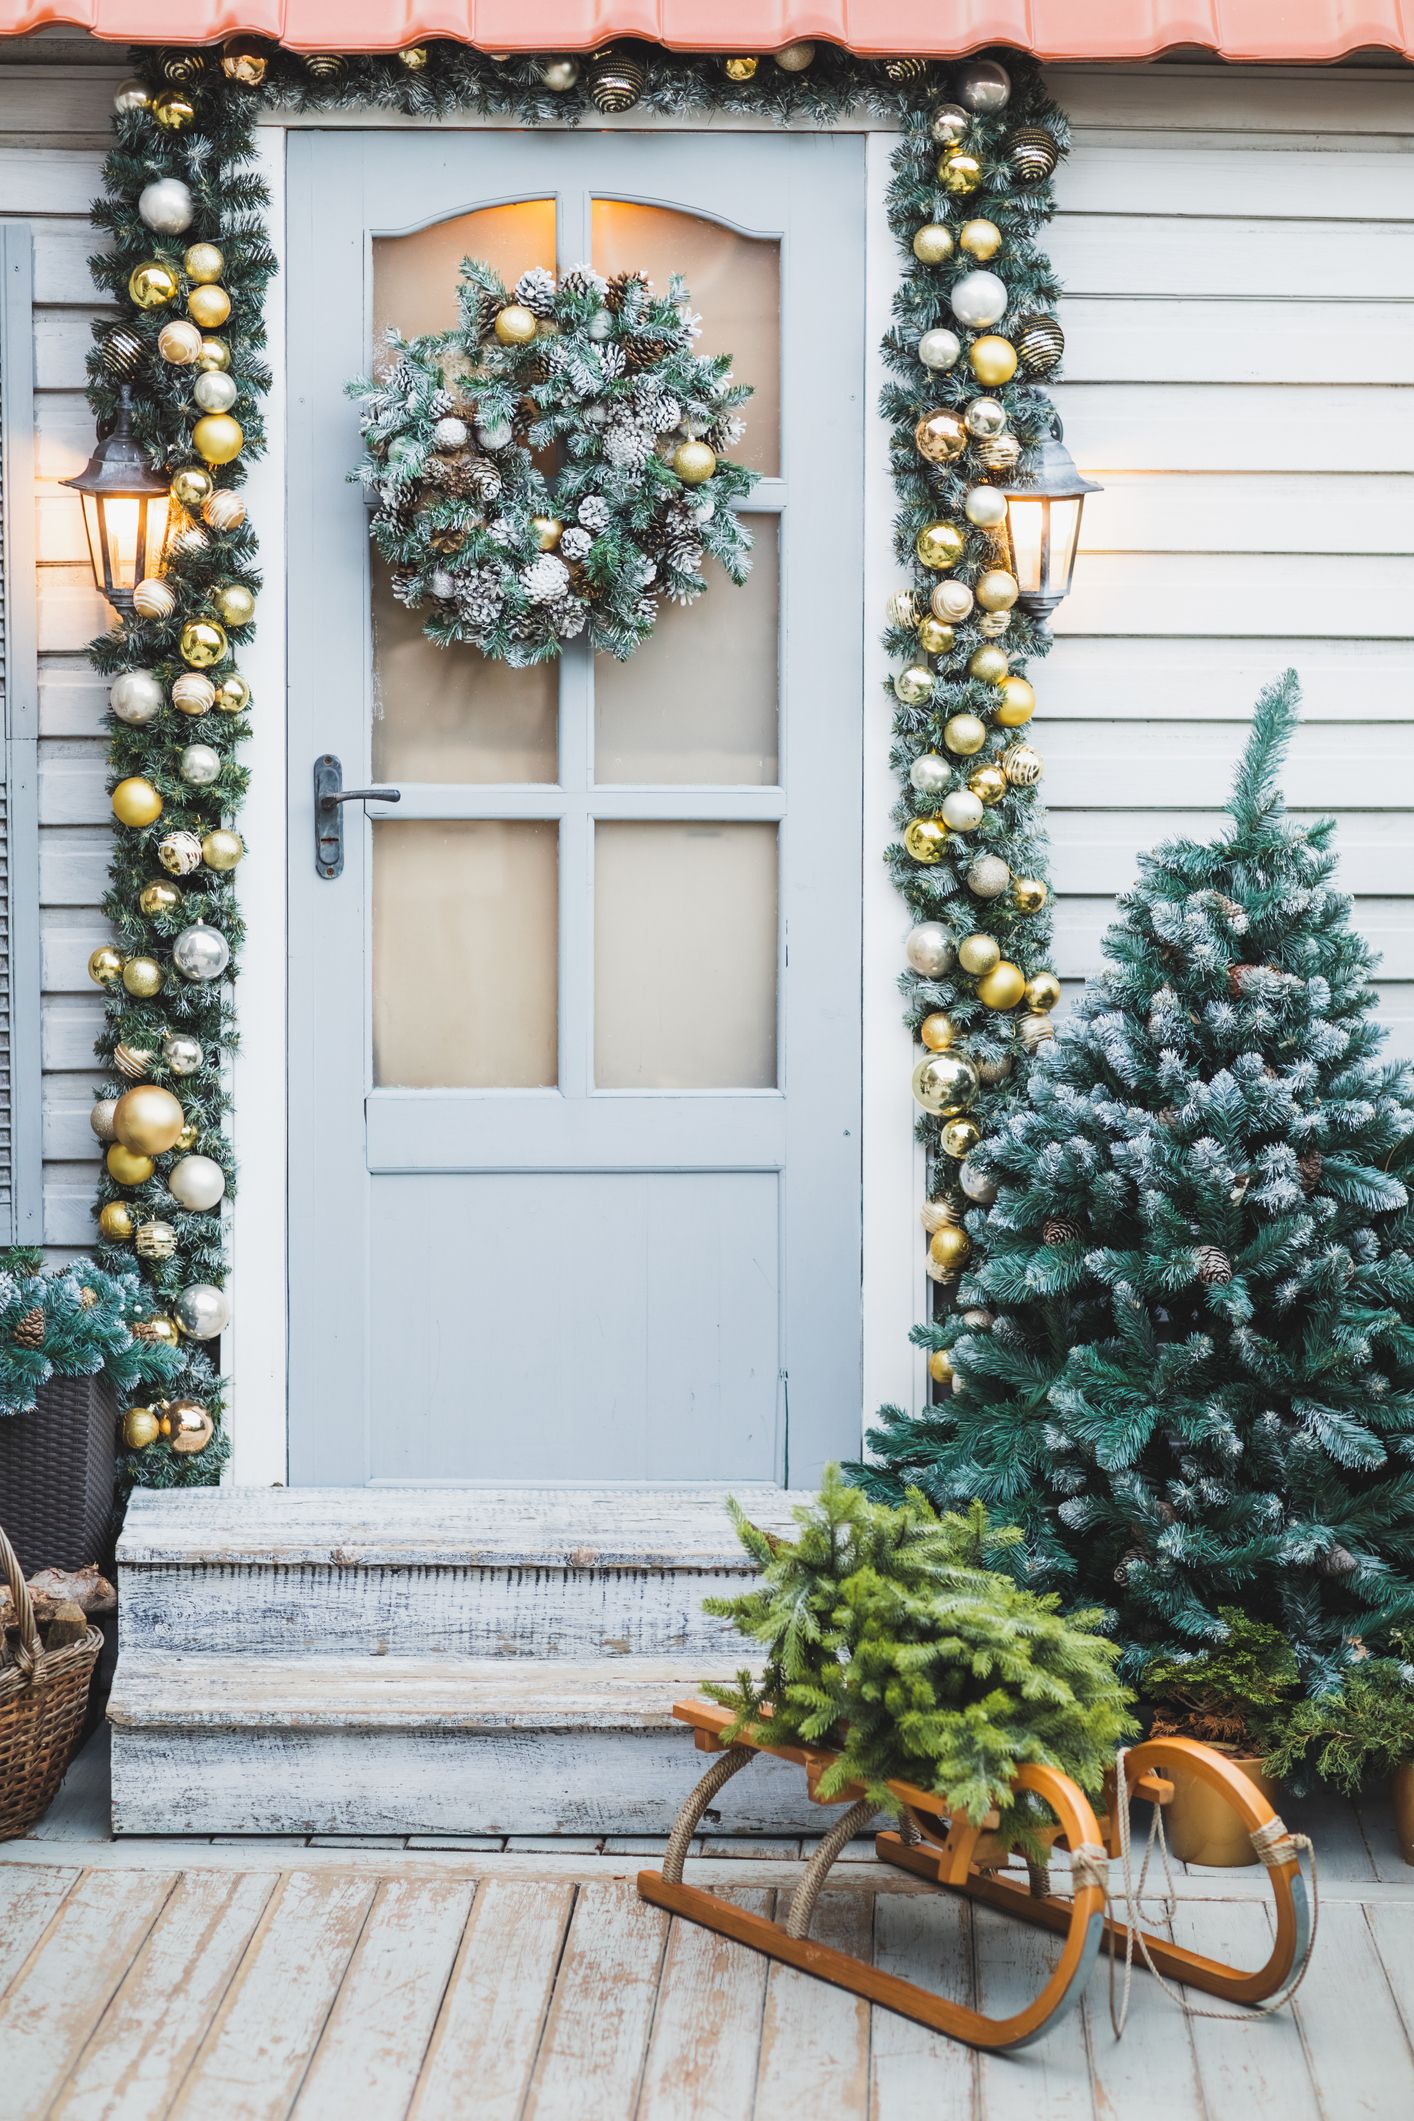 Christmas Decorating With Plants; How to Make Plants Look Festive - My  Tasteful Space